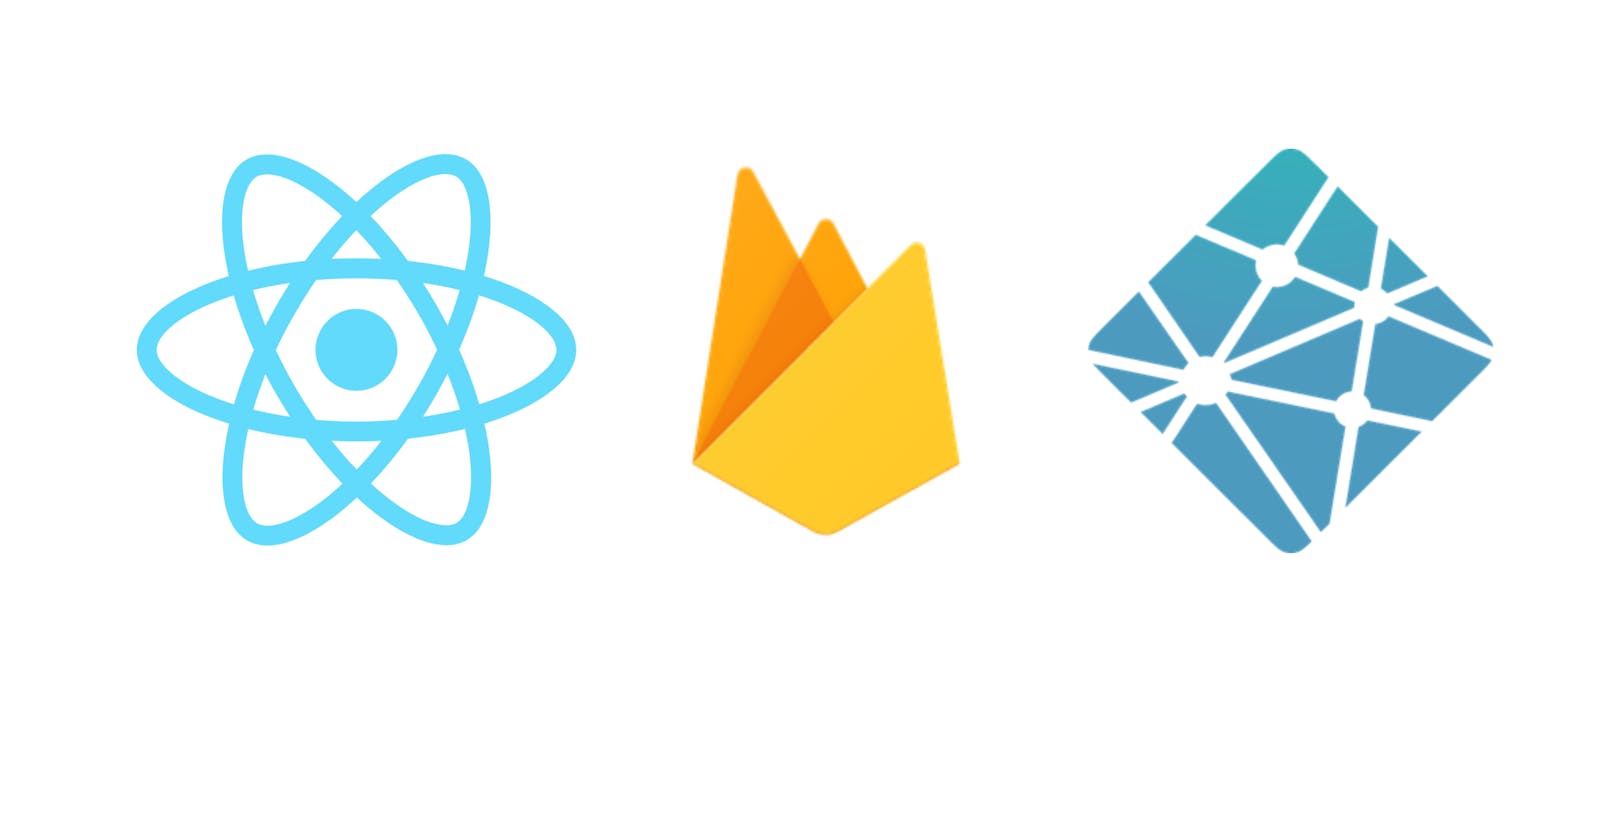 How to use Firebase config on Netlify safely for a React App?